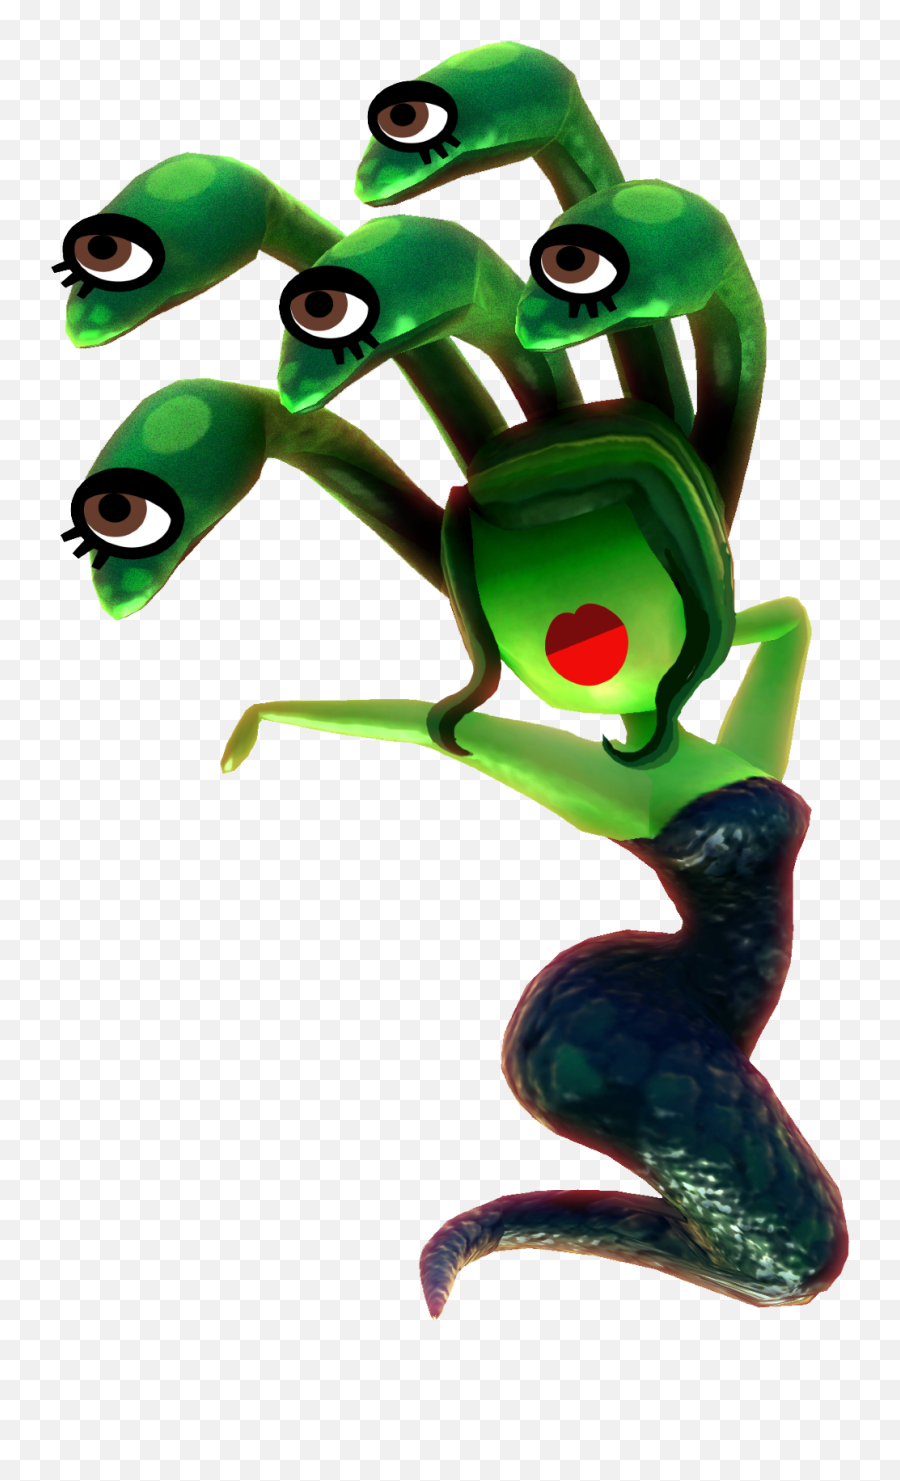 Medusa Png Image With No Background - Miitopia Monsters,Medusa Png